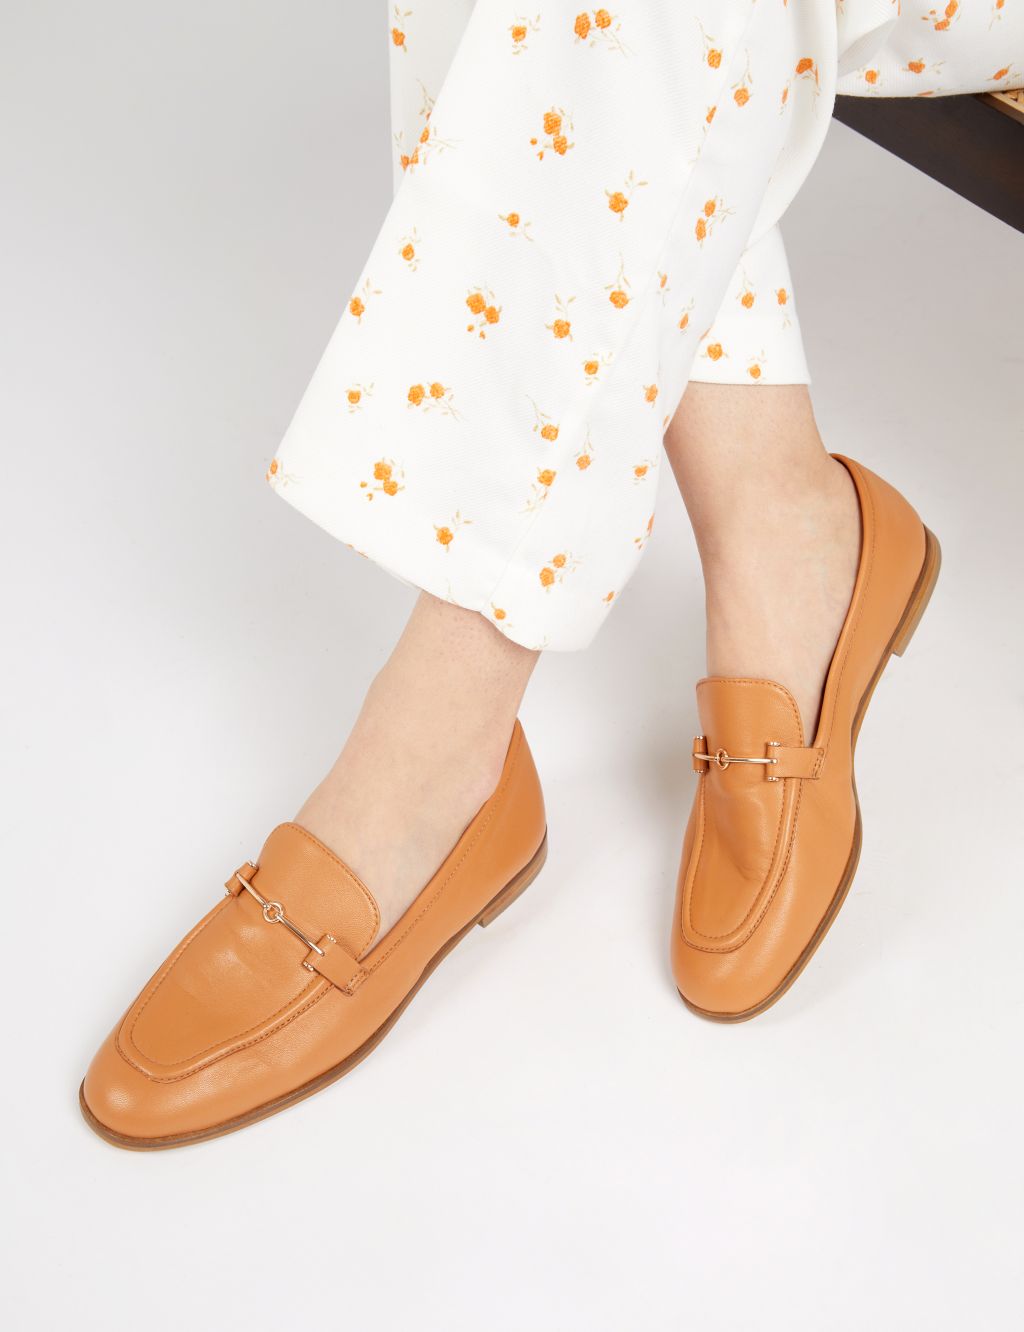 Leather Slip On Bar Flat Loafers image 1